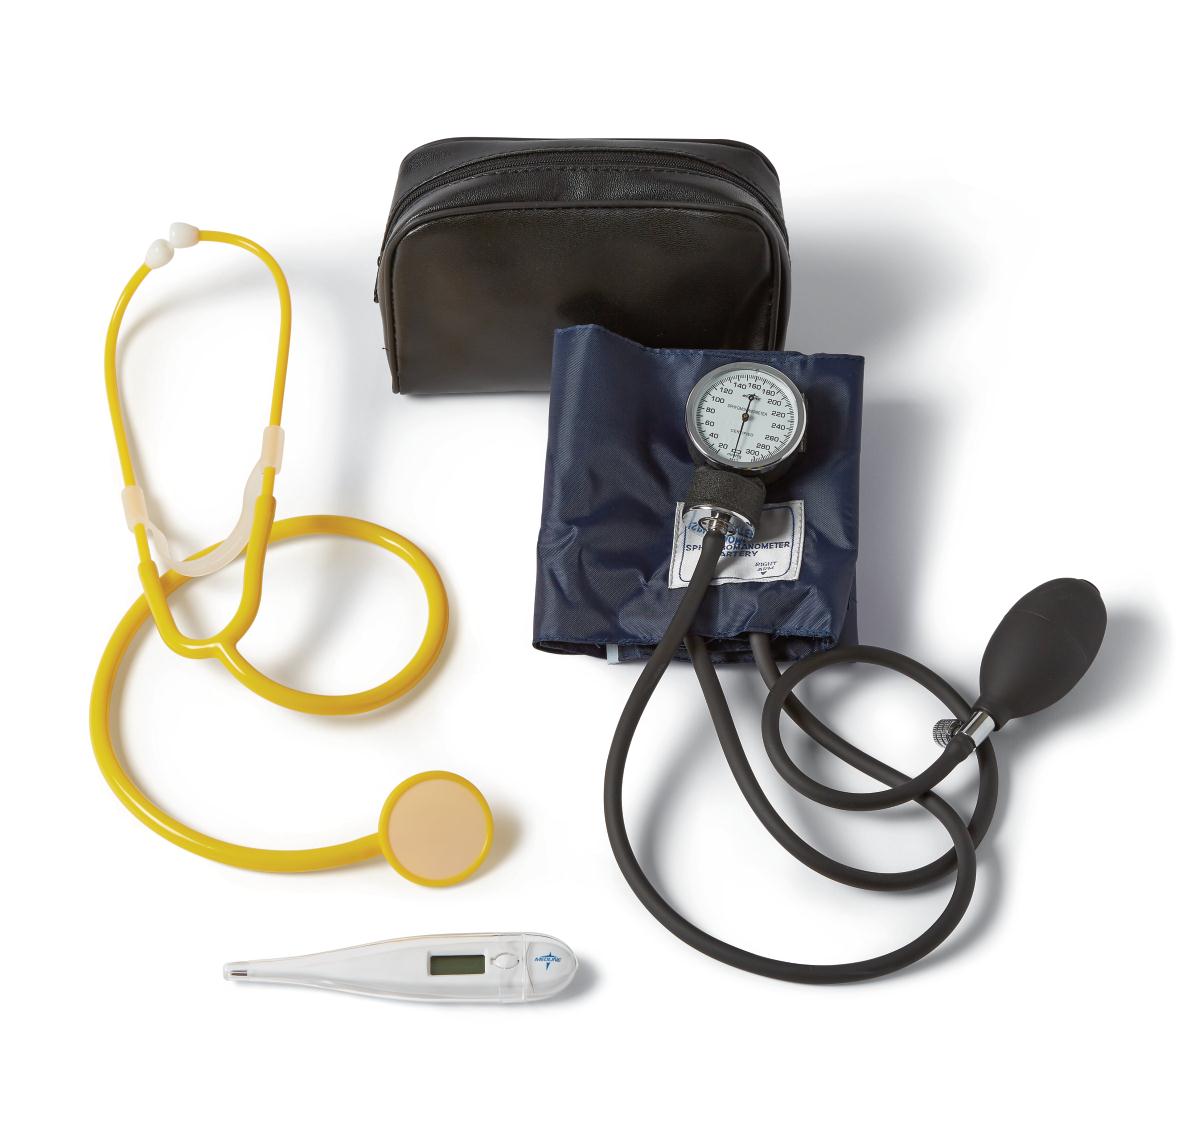 Basic MRSA Protection Kit with Handheld Blood Pressure Unit, Disposable Stethoscope, and Digital Oral Thermometer